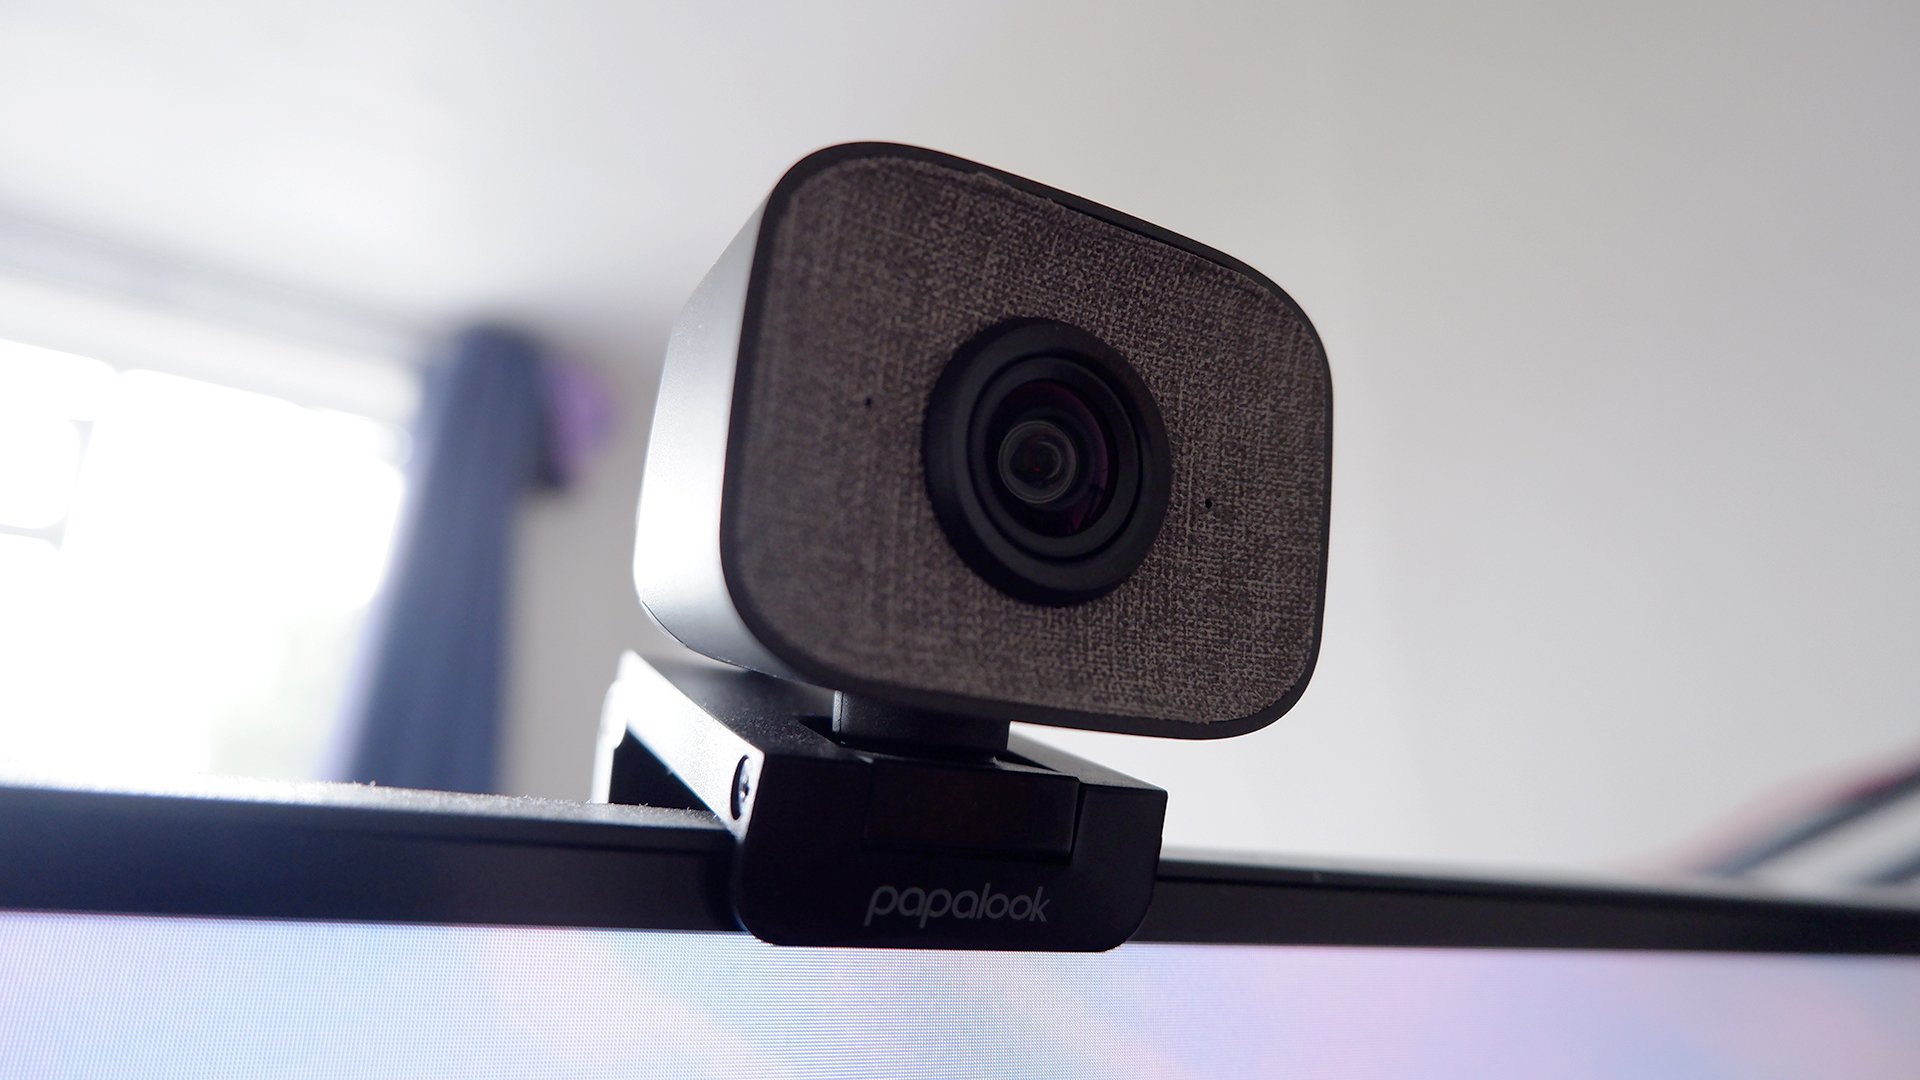 Papalook PA930 webcam on top of a computer monitor